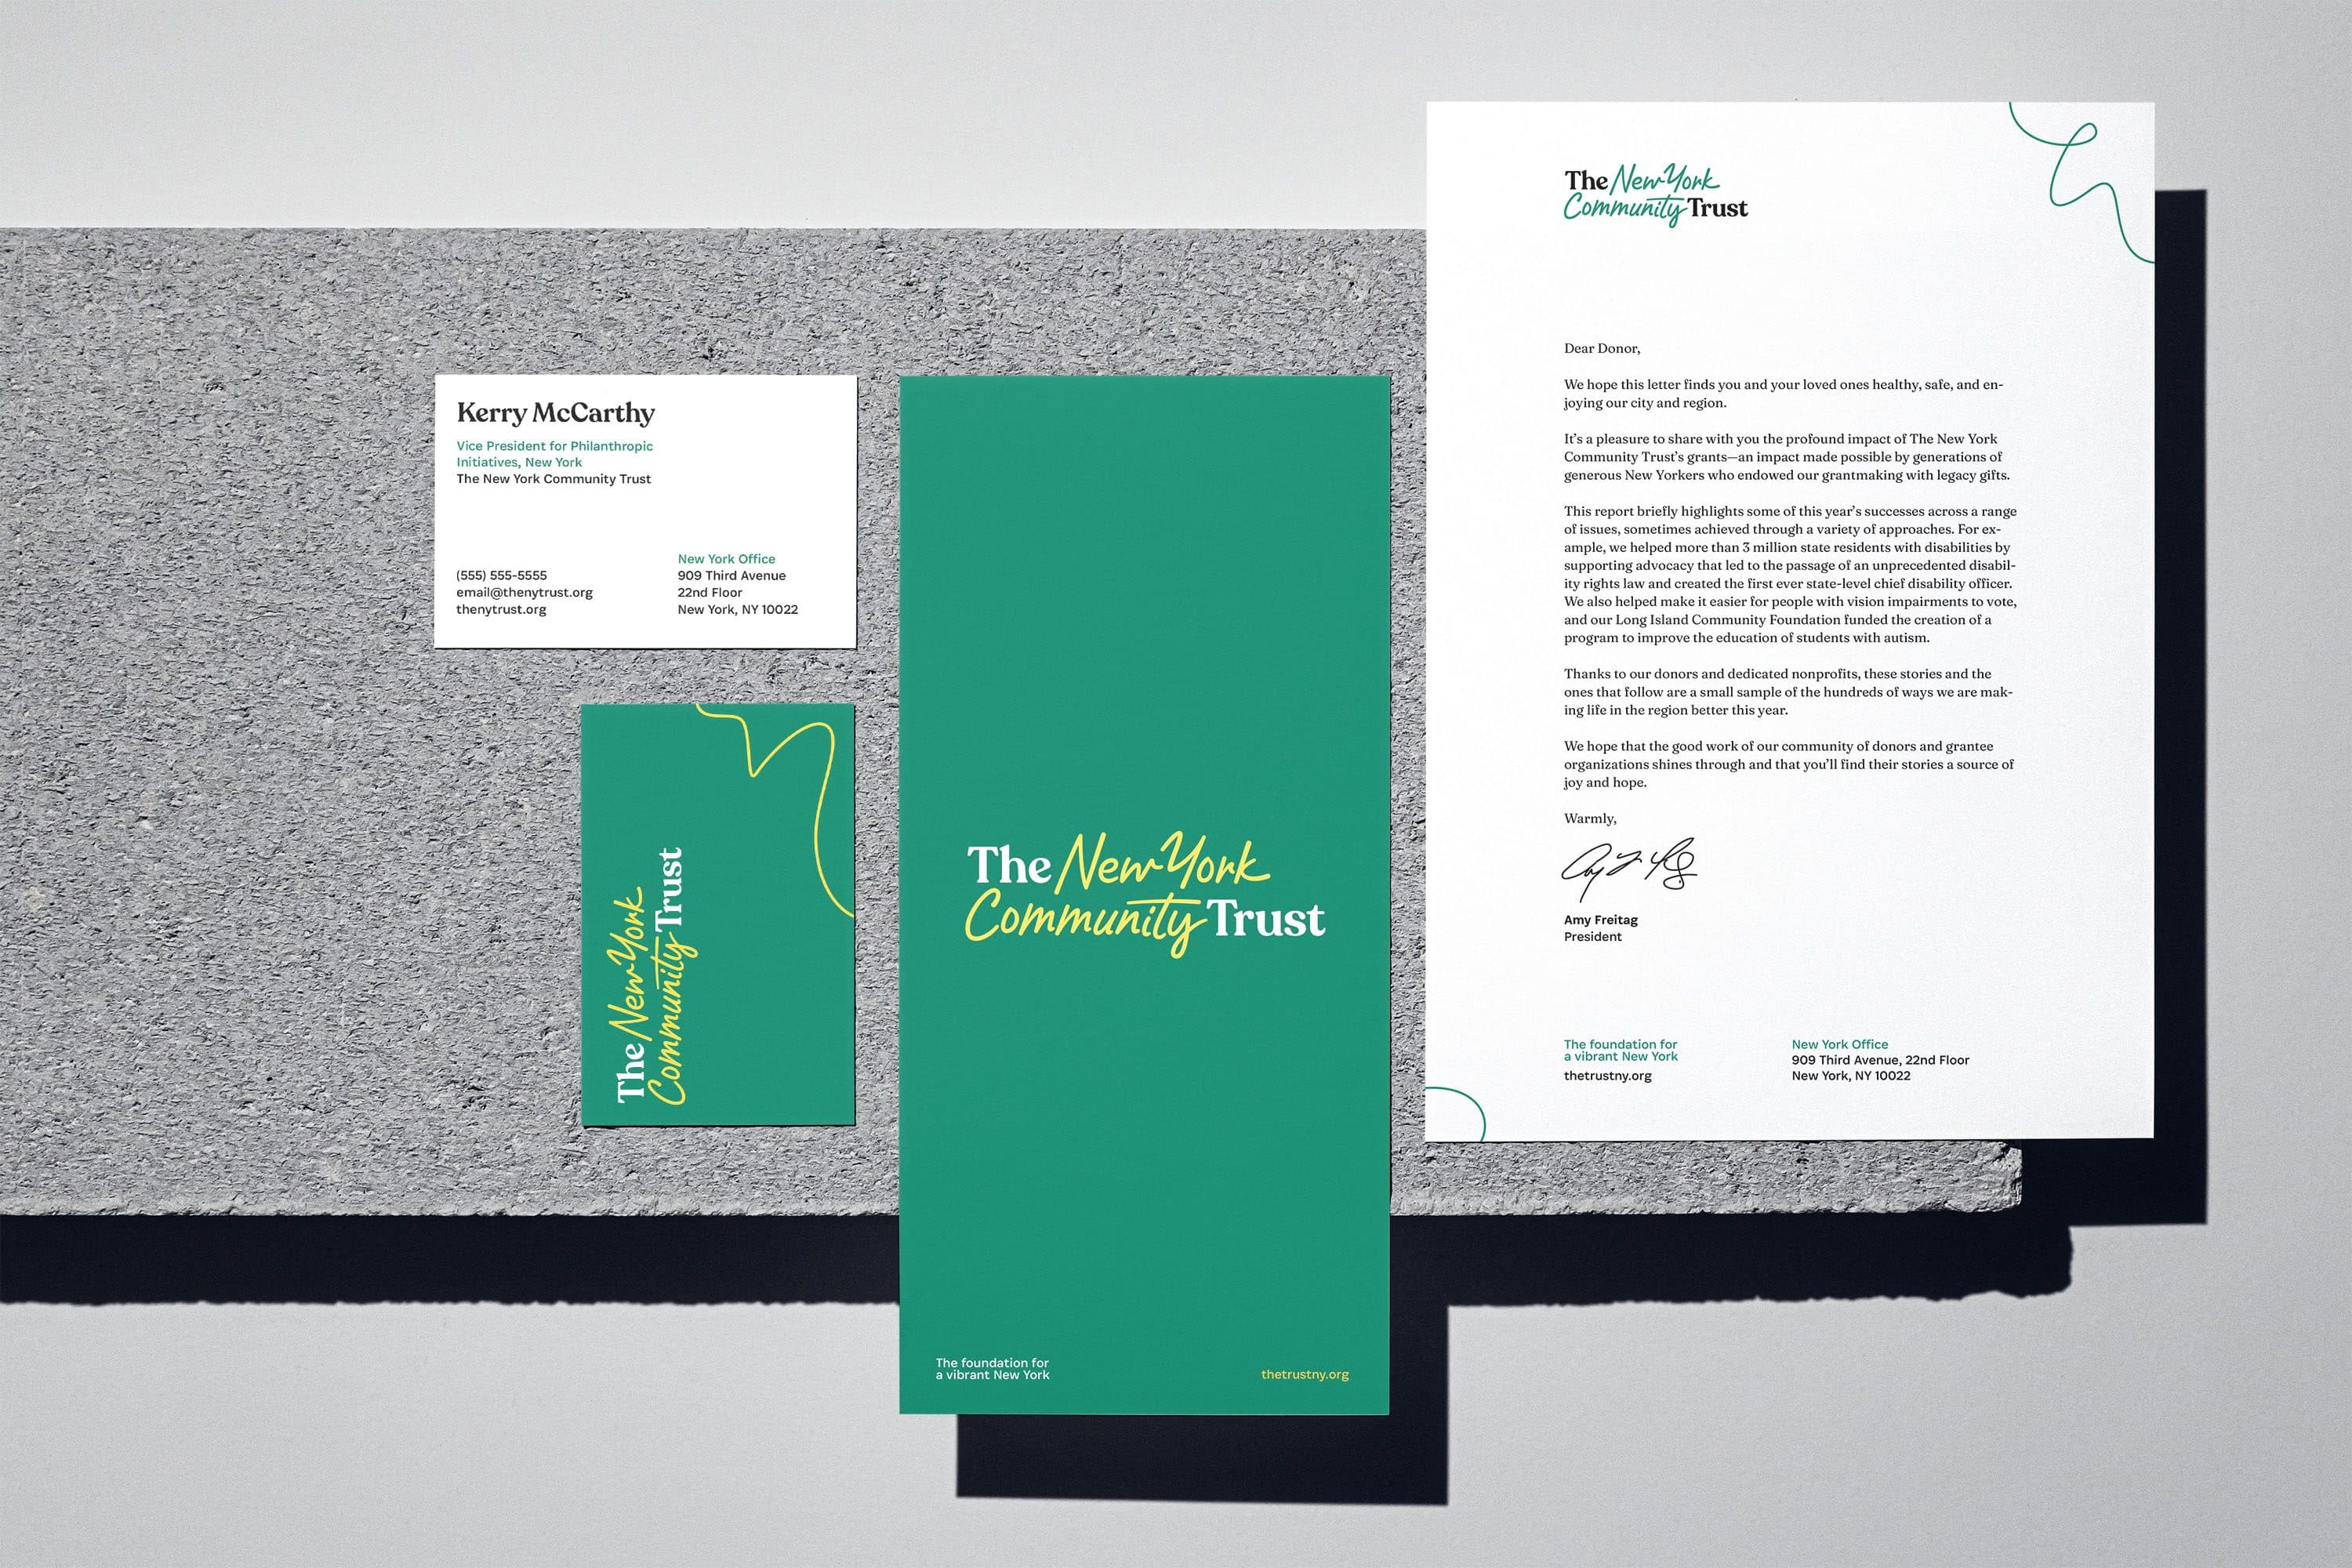 A set of branded stationary including a business card, brochure, letterhead, and envelope for "The New York Community Trust". The color scheme consists of green and white with yellow accents and elegant typography.